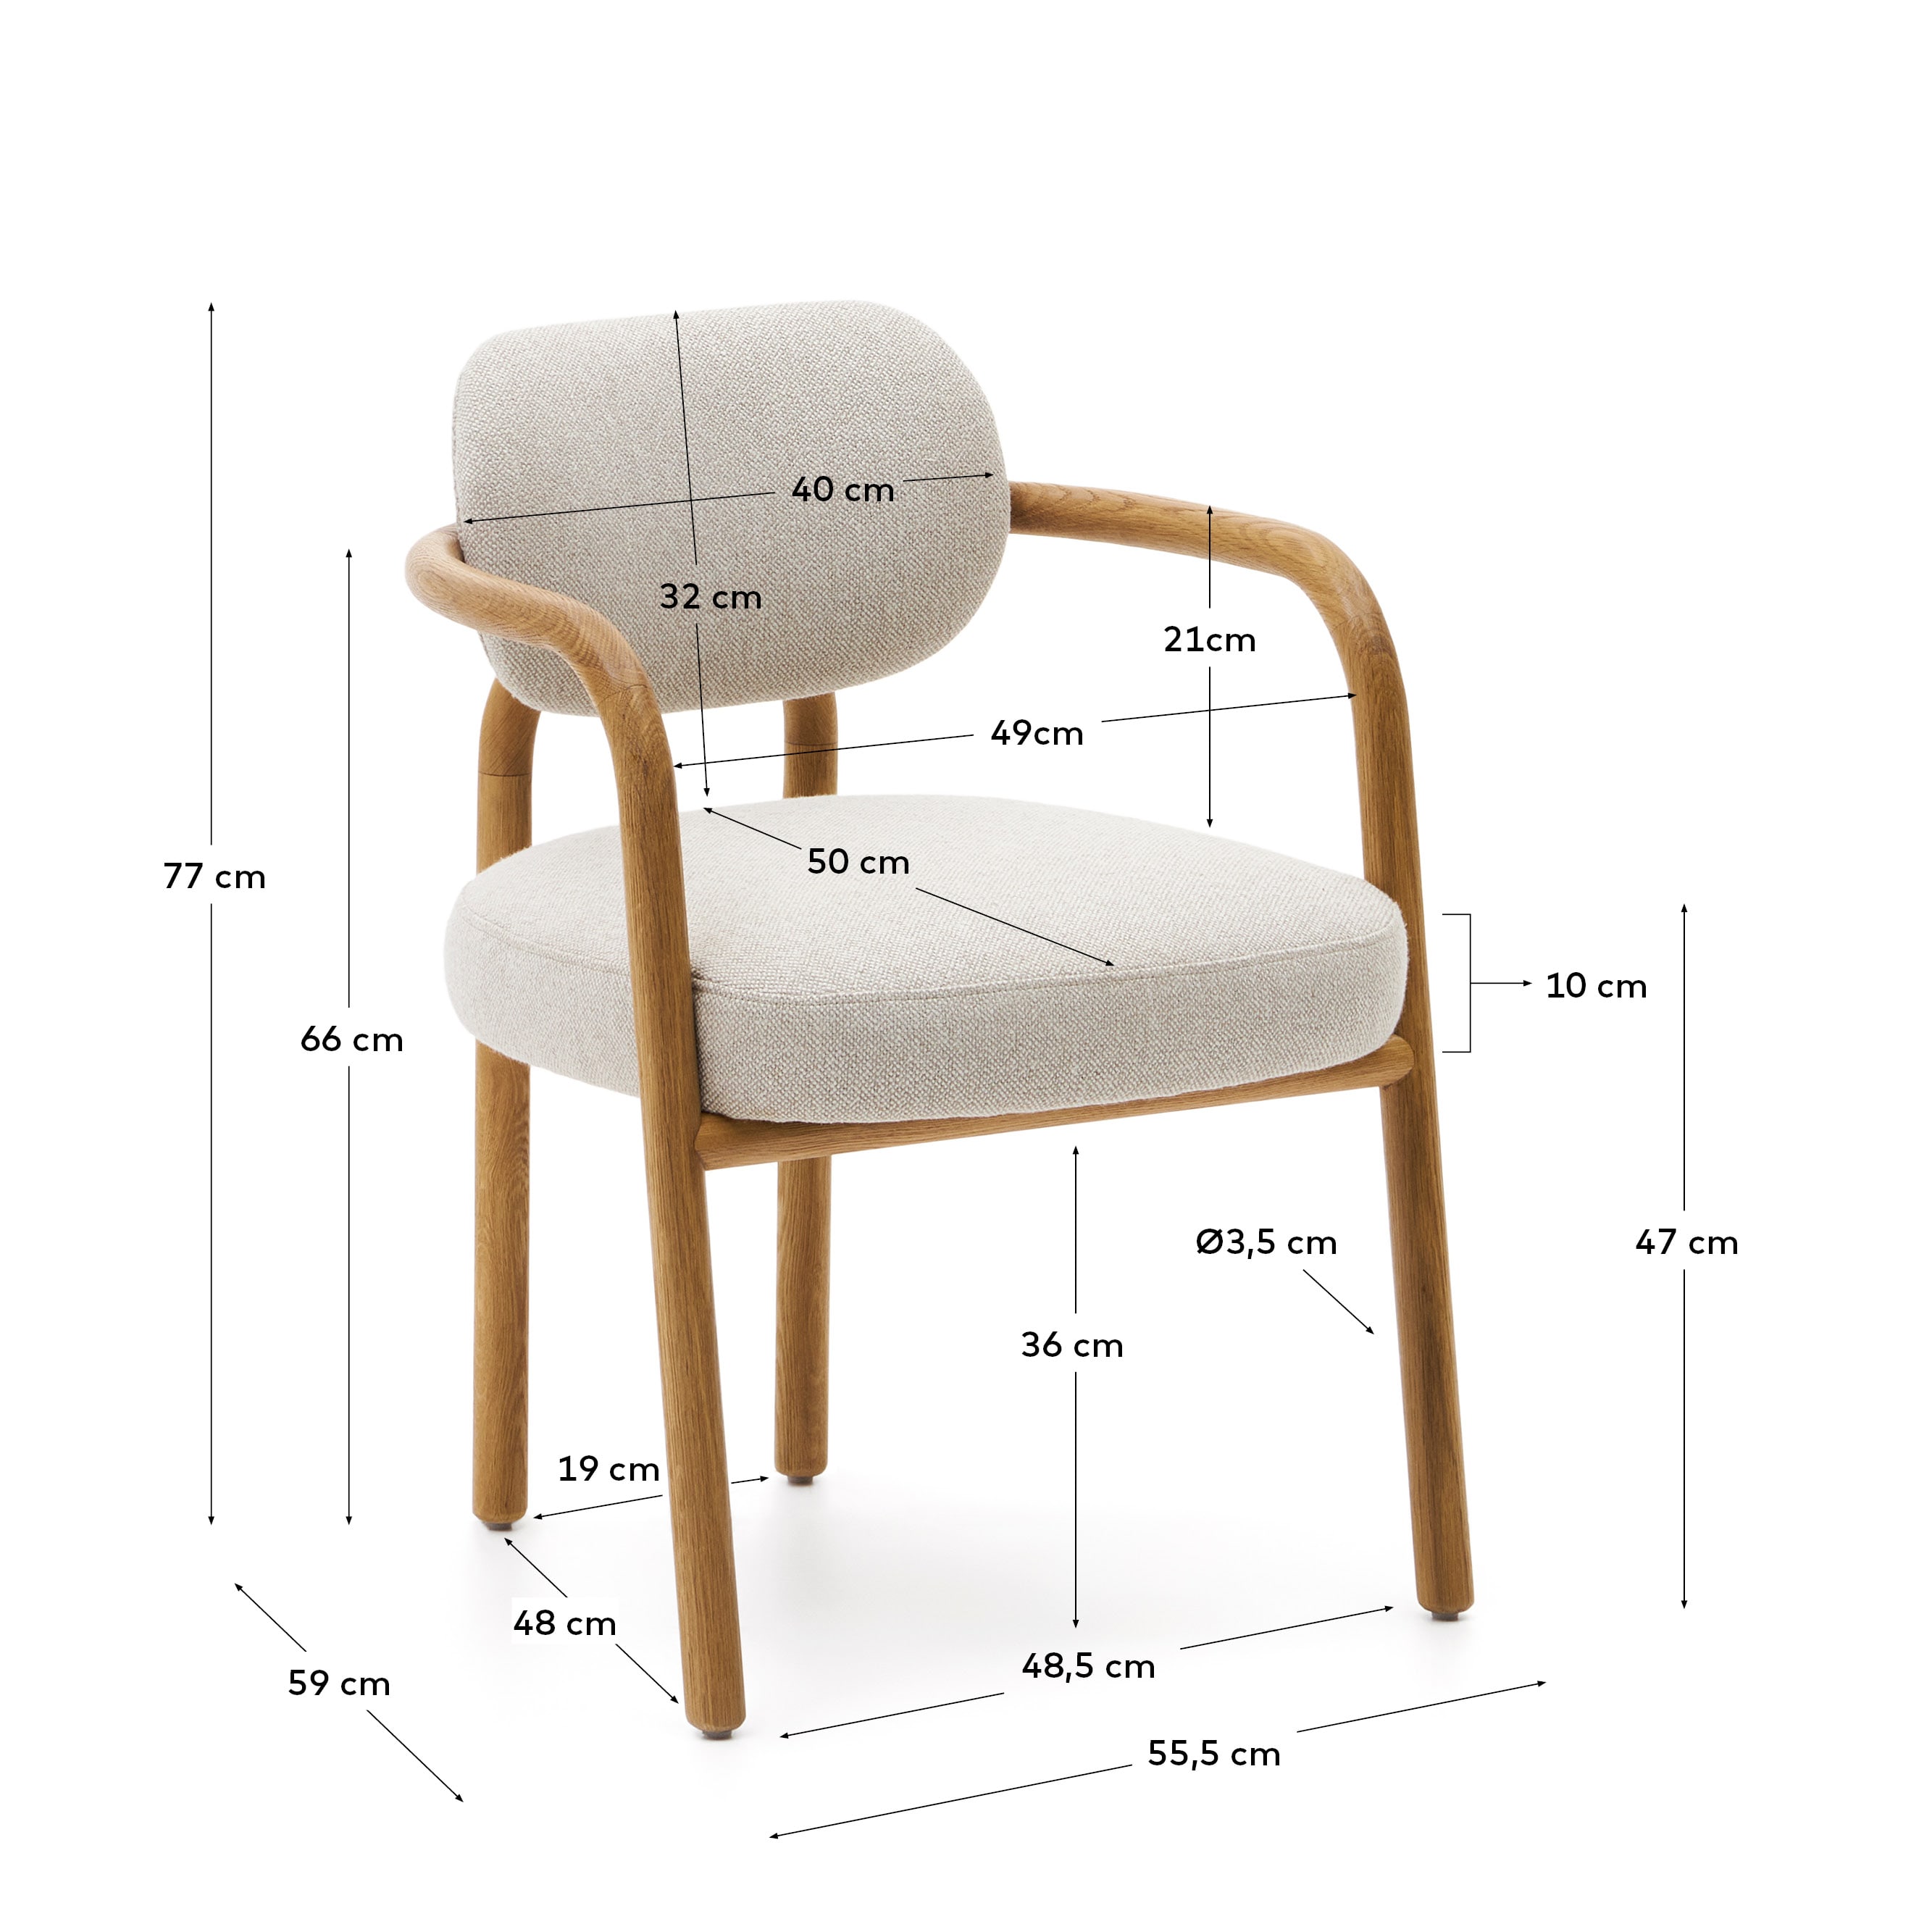 Melqui beige chair in solid oak wood a natural finish - sizes